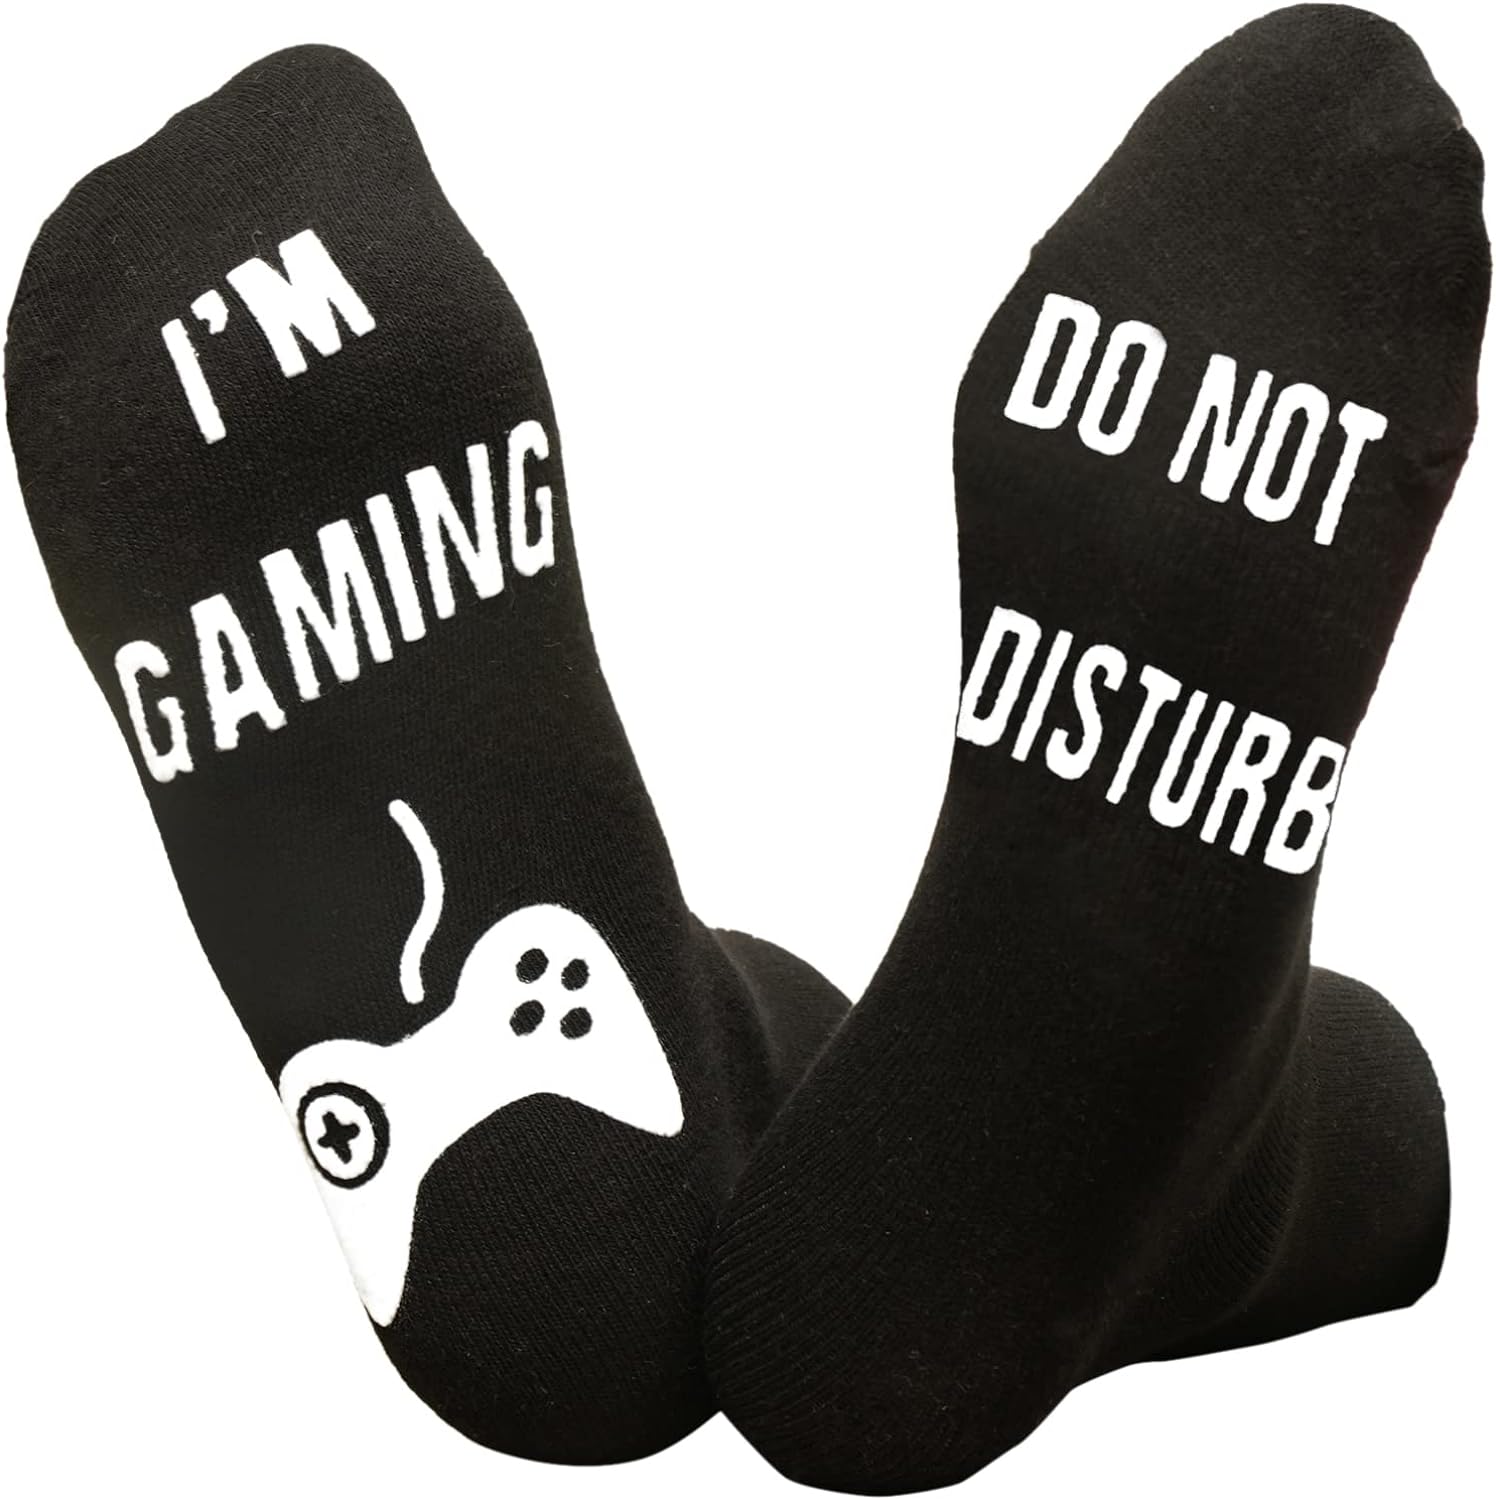 Do Not Disturb Im Gaming,Soft Unisex Sock Novelty Funny Saying Crew Socks, The Perfect Funny Christmas Gifts for Men Women